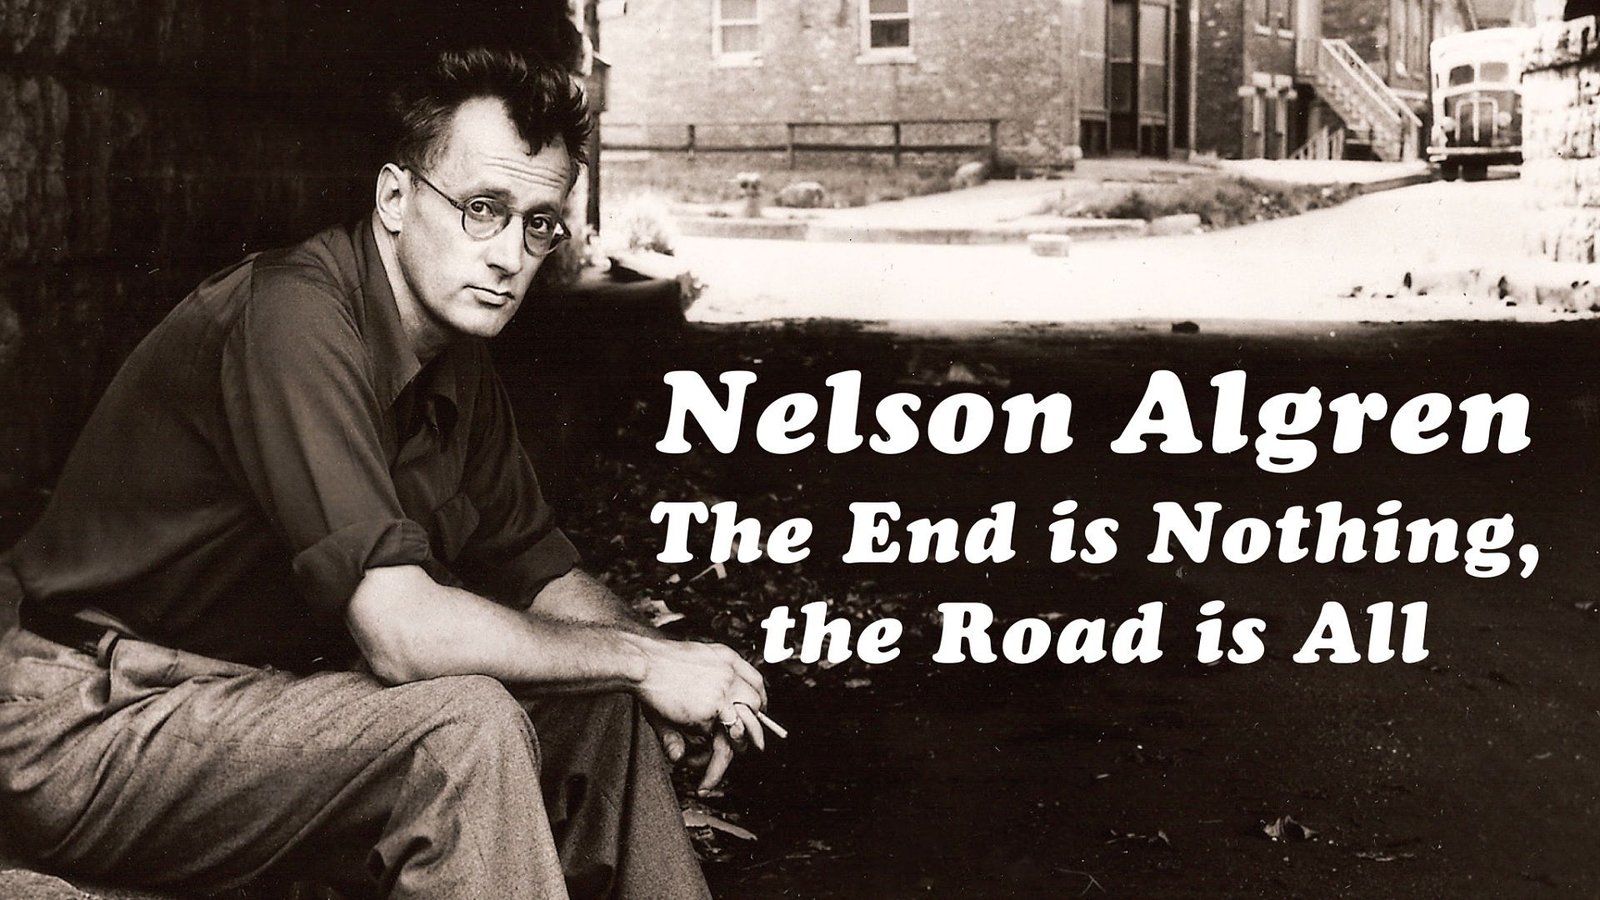 Nelson Algren: The End is Nothing, the Road is All